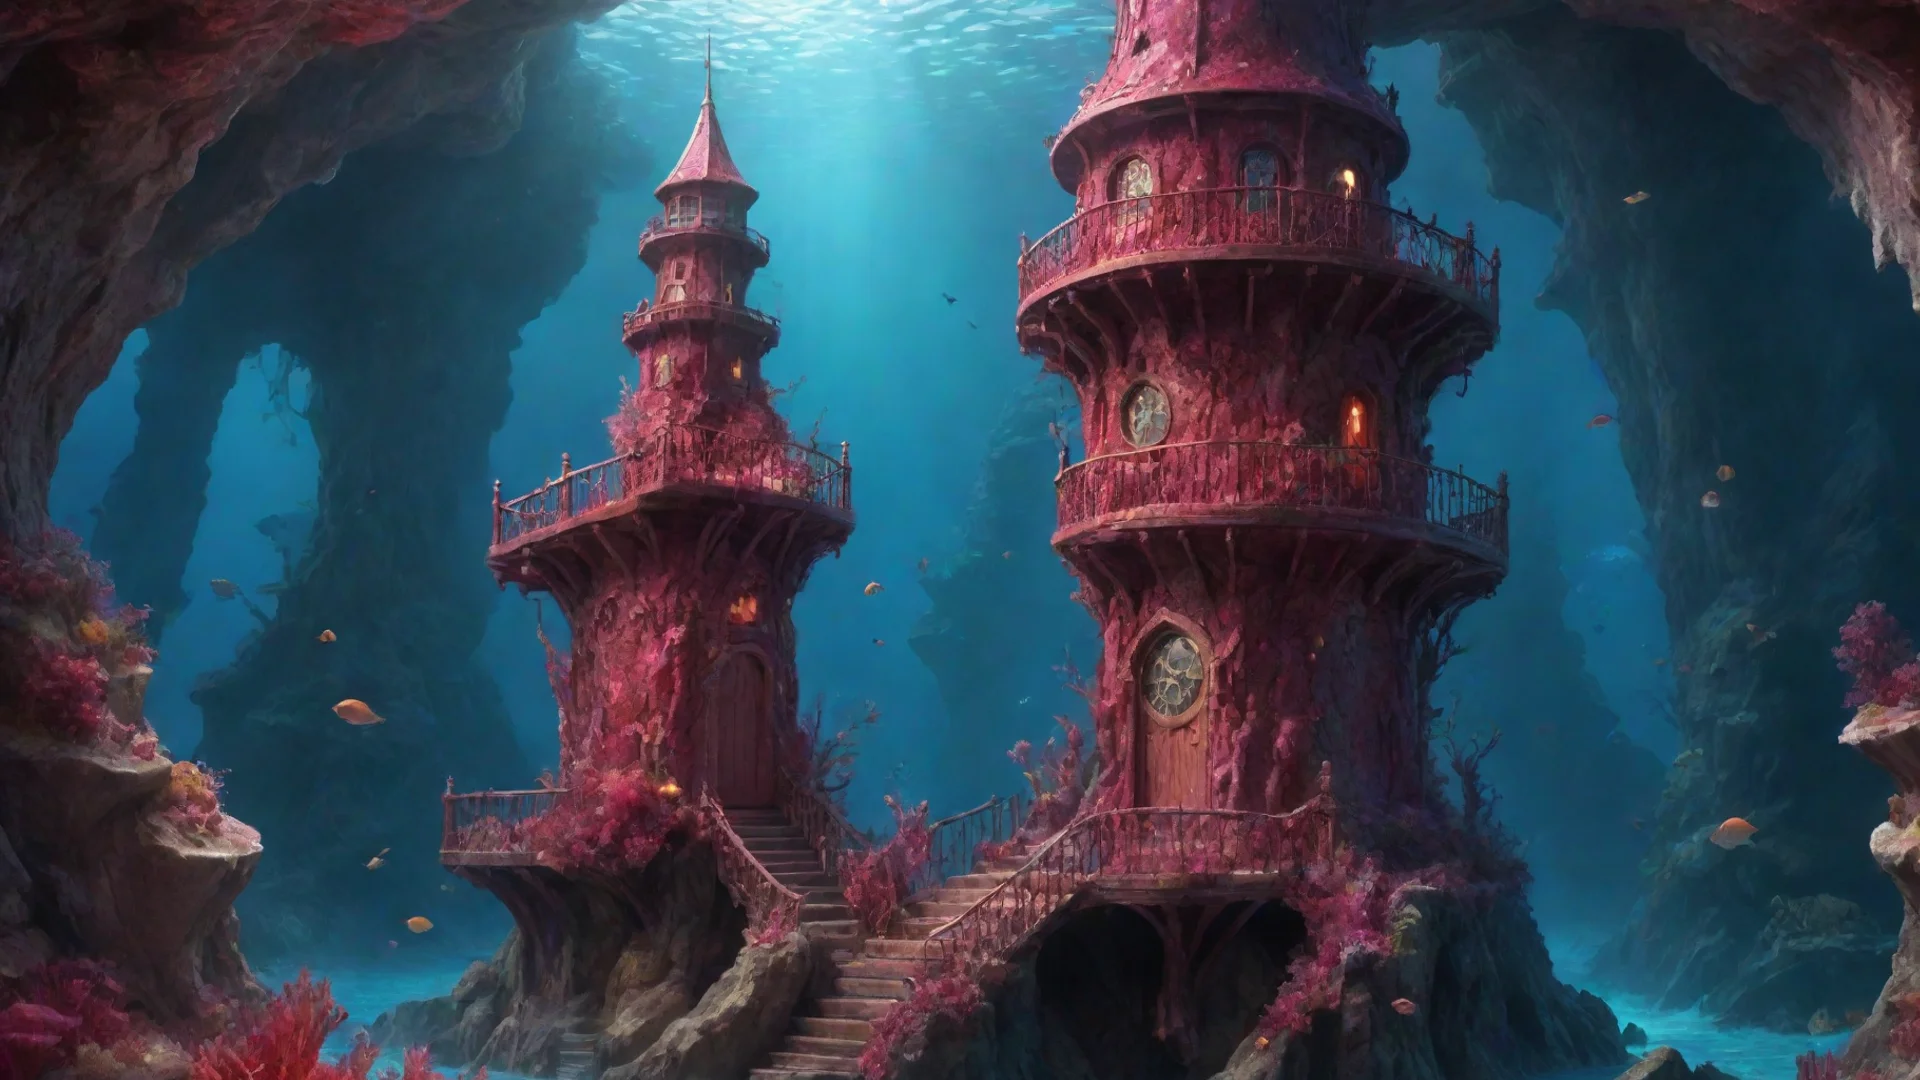 aimagnificent fantasy watch tower inside ruby crystal in an undersea subterranean landscape highly detailed intricate octa wide